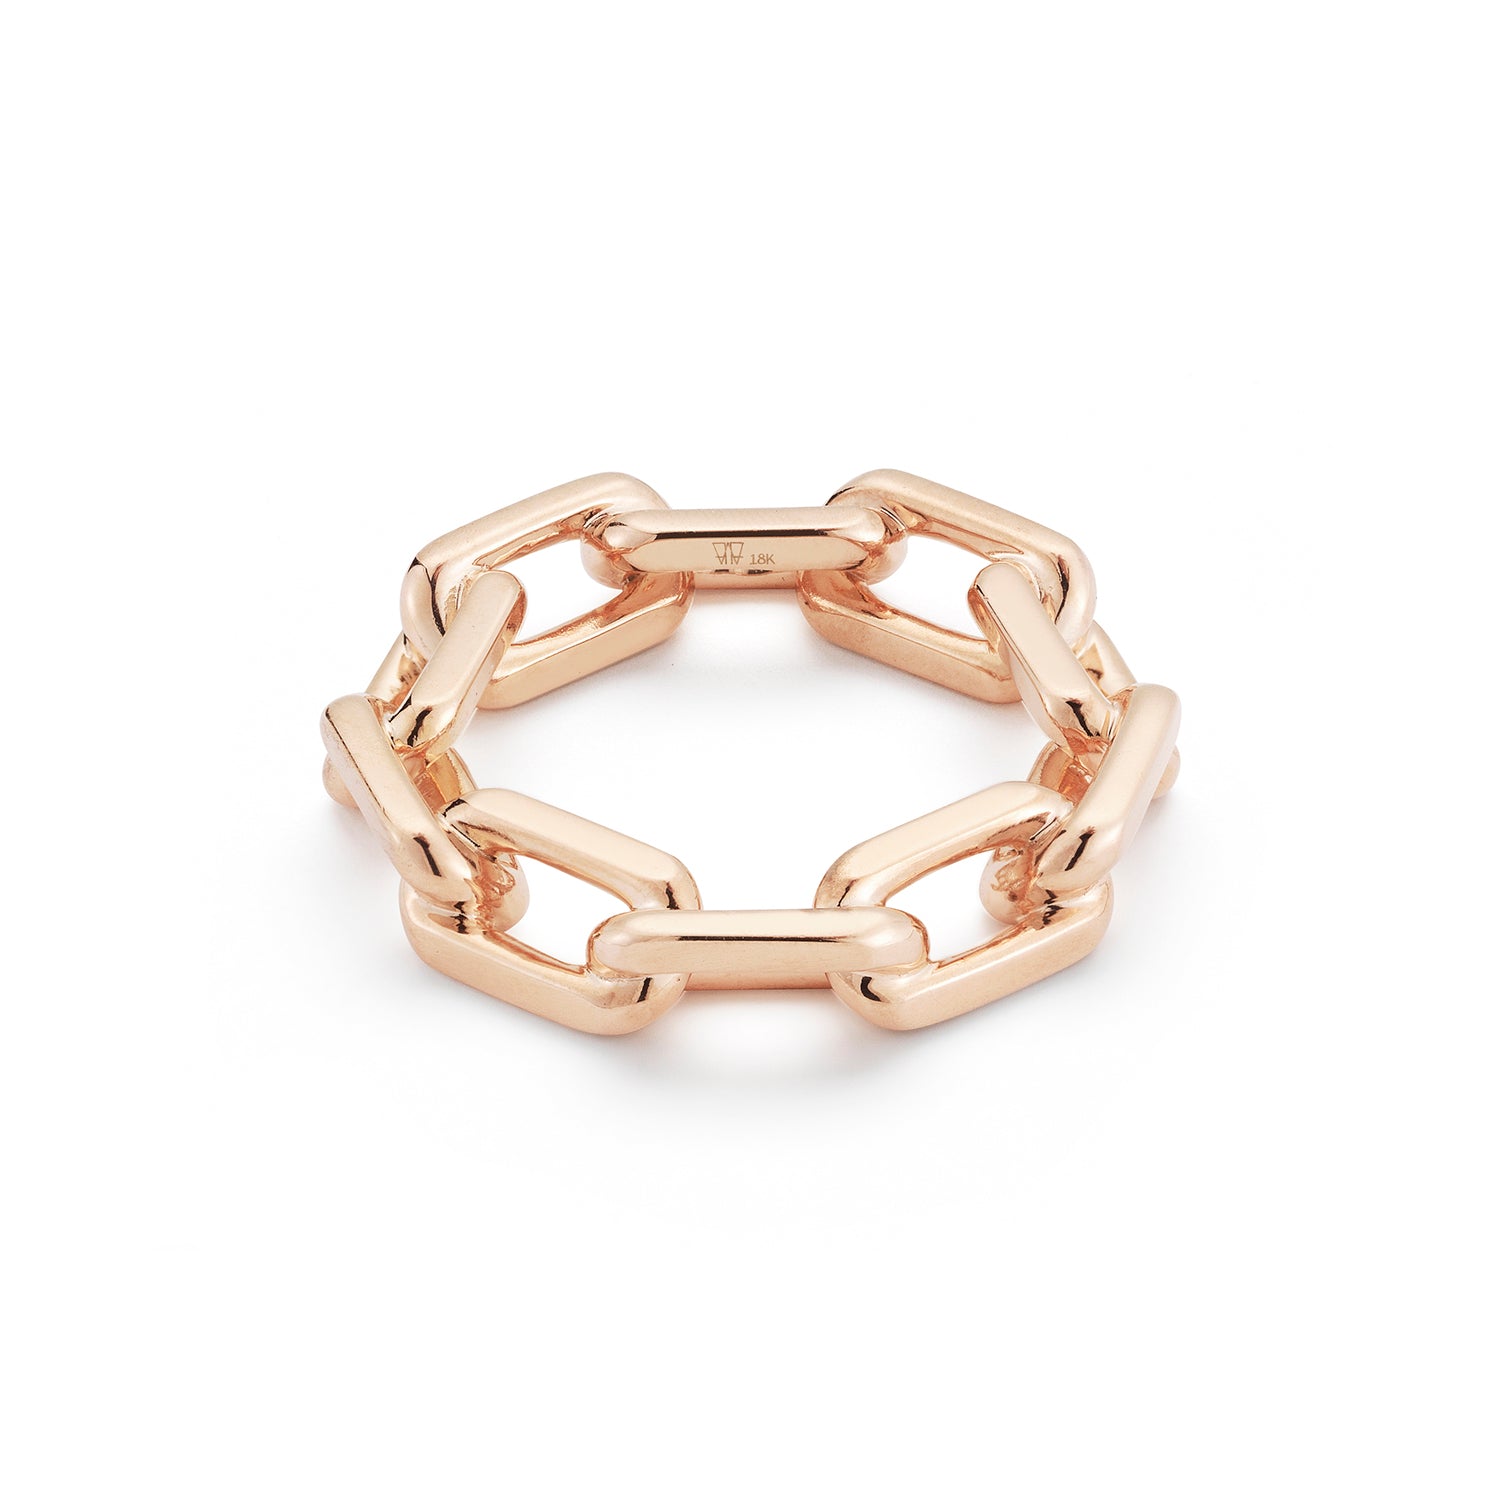 SAXON 18K ROSE GOLD LARGE CHAIN LINK RING – Walters Faith